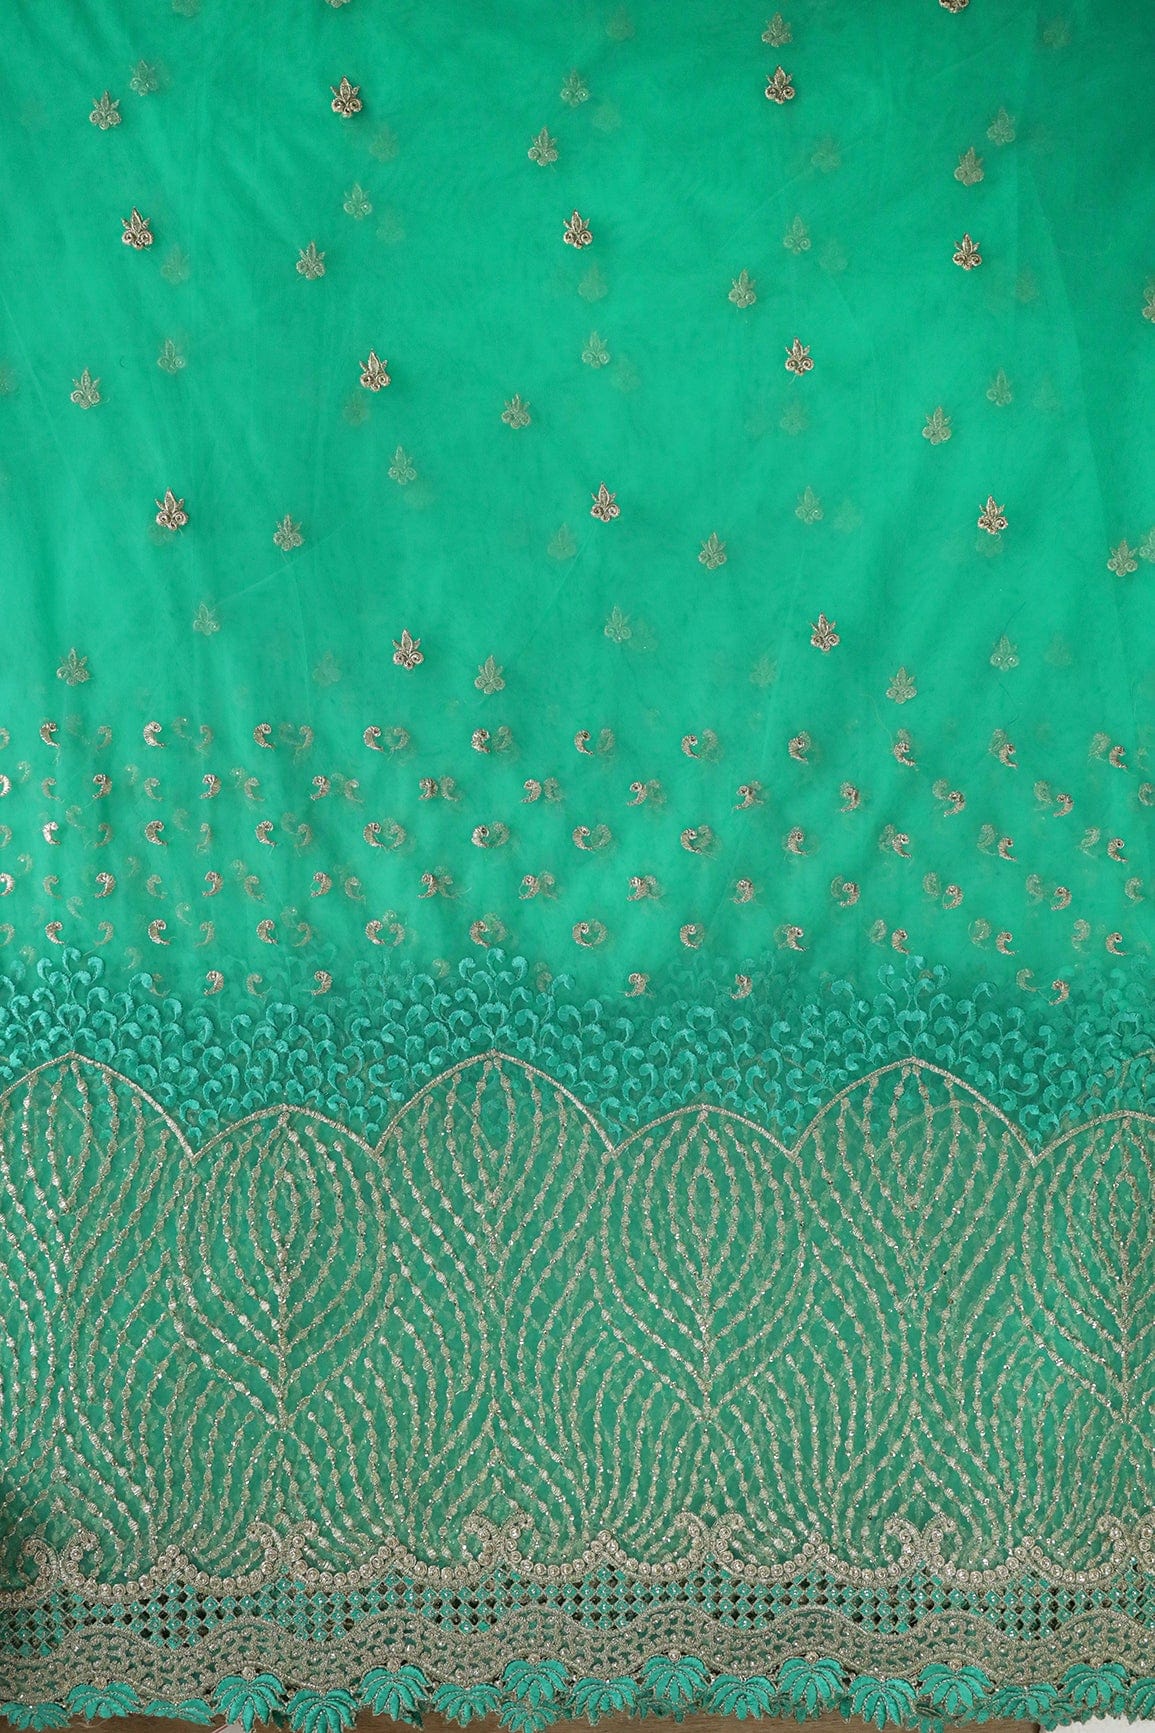 Big Width''56'' Mint Green Thread With Zari Traditional Embroidery Work On Mint Green Soft Net Fabric With Border - doeraa